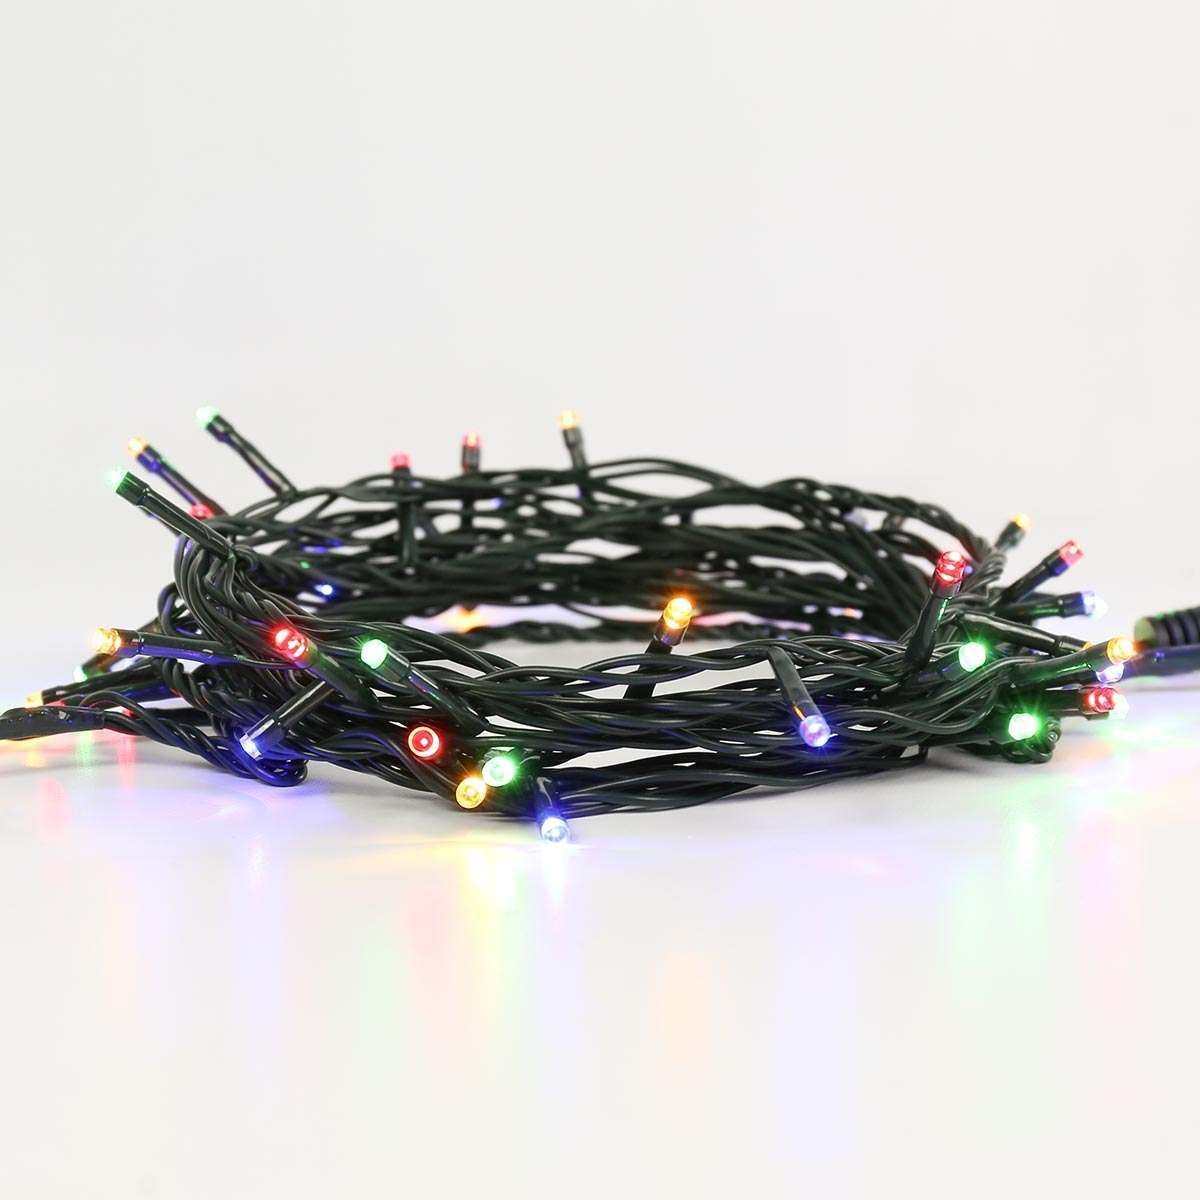 ConnectGo Outdoor LED Fairy Lights, Low Voltage (31v), Connectable, Dark Green Cable